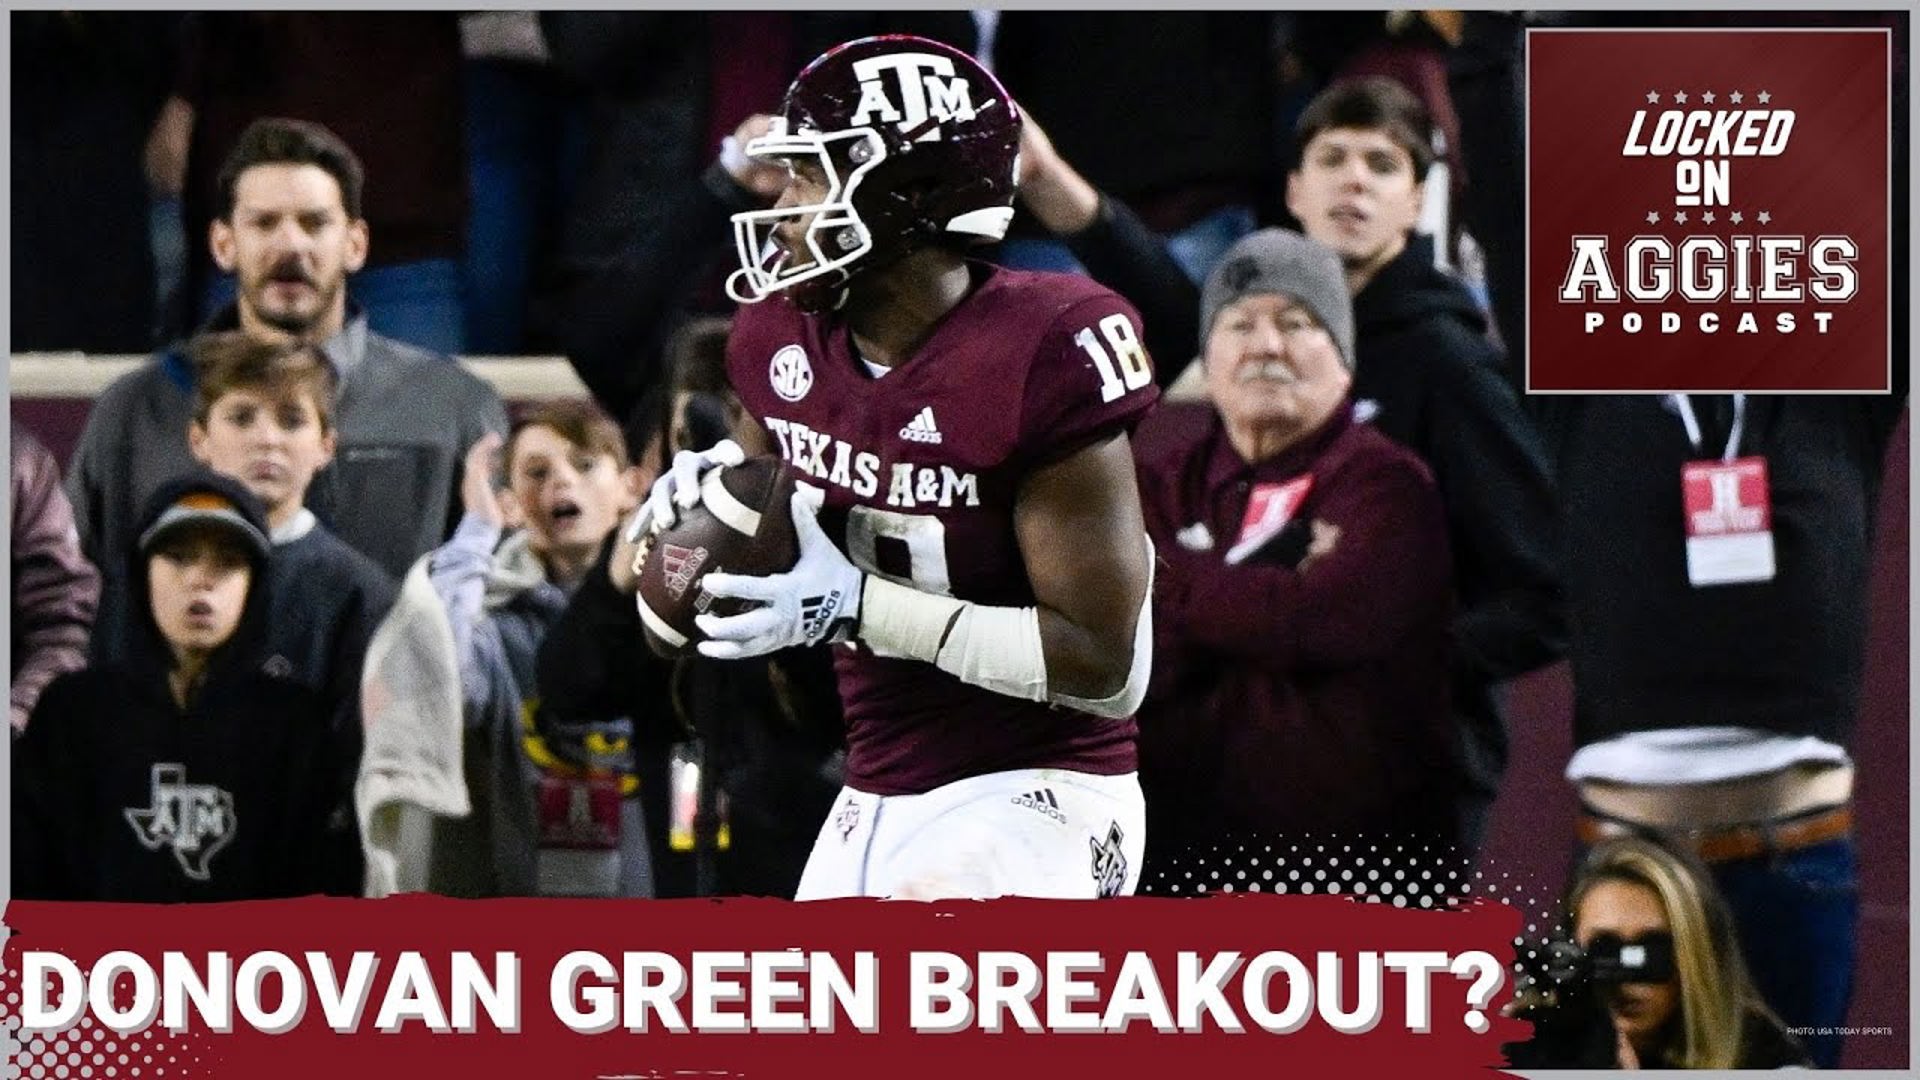 On today's episode of Locked On Aggies, host Andrew Stefaniak talks about how the national media isn't talking enough about Donovan Green